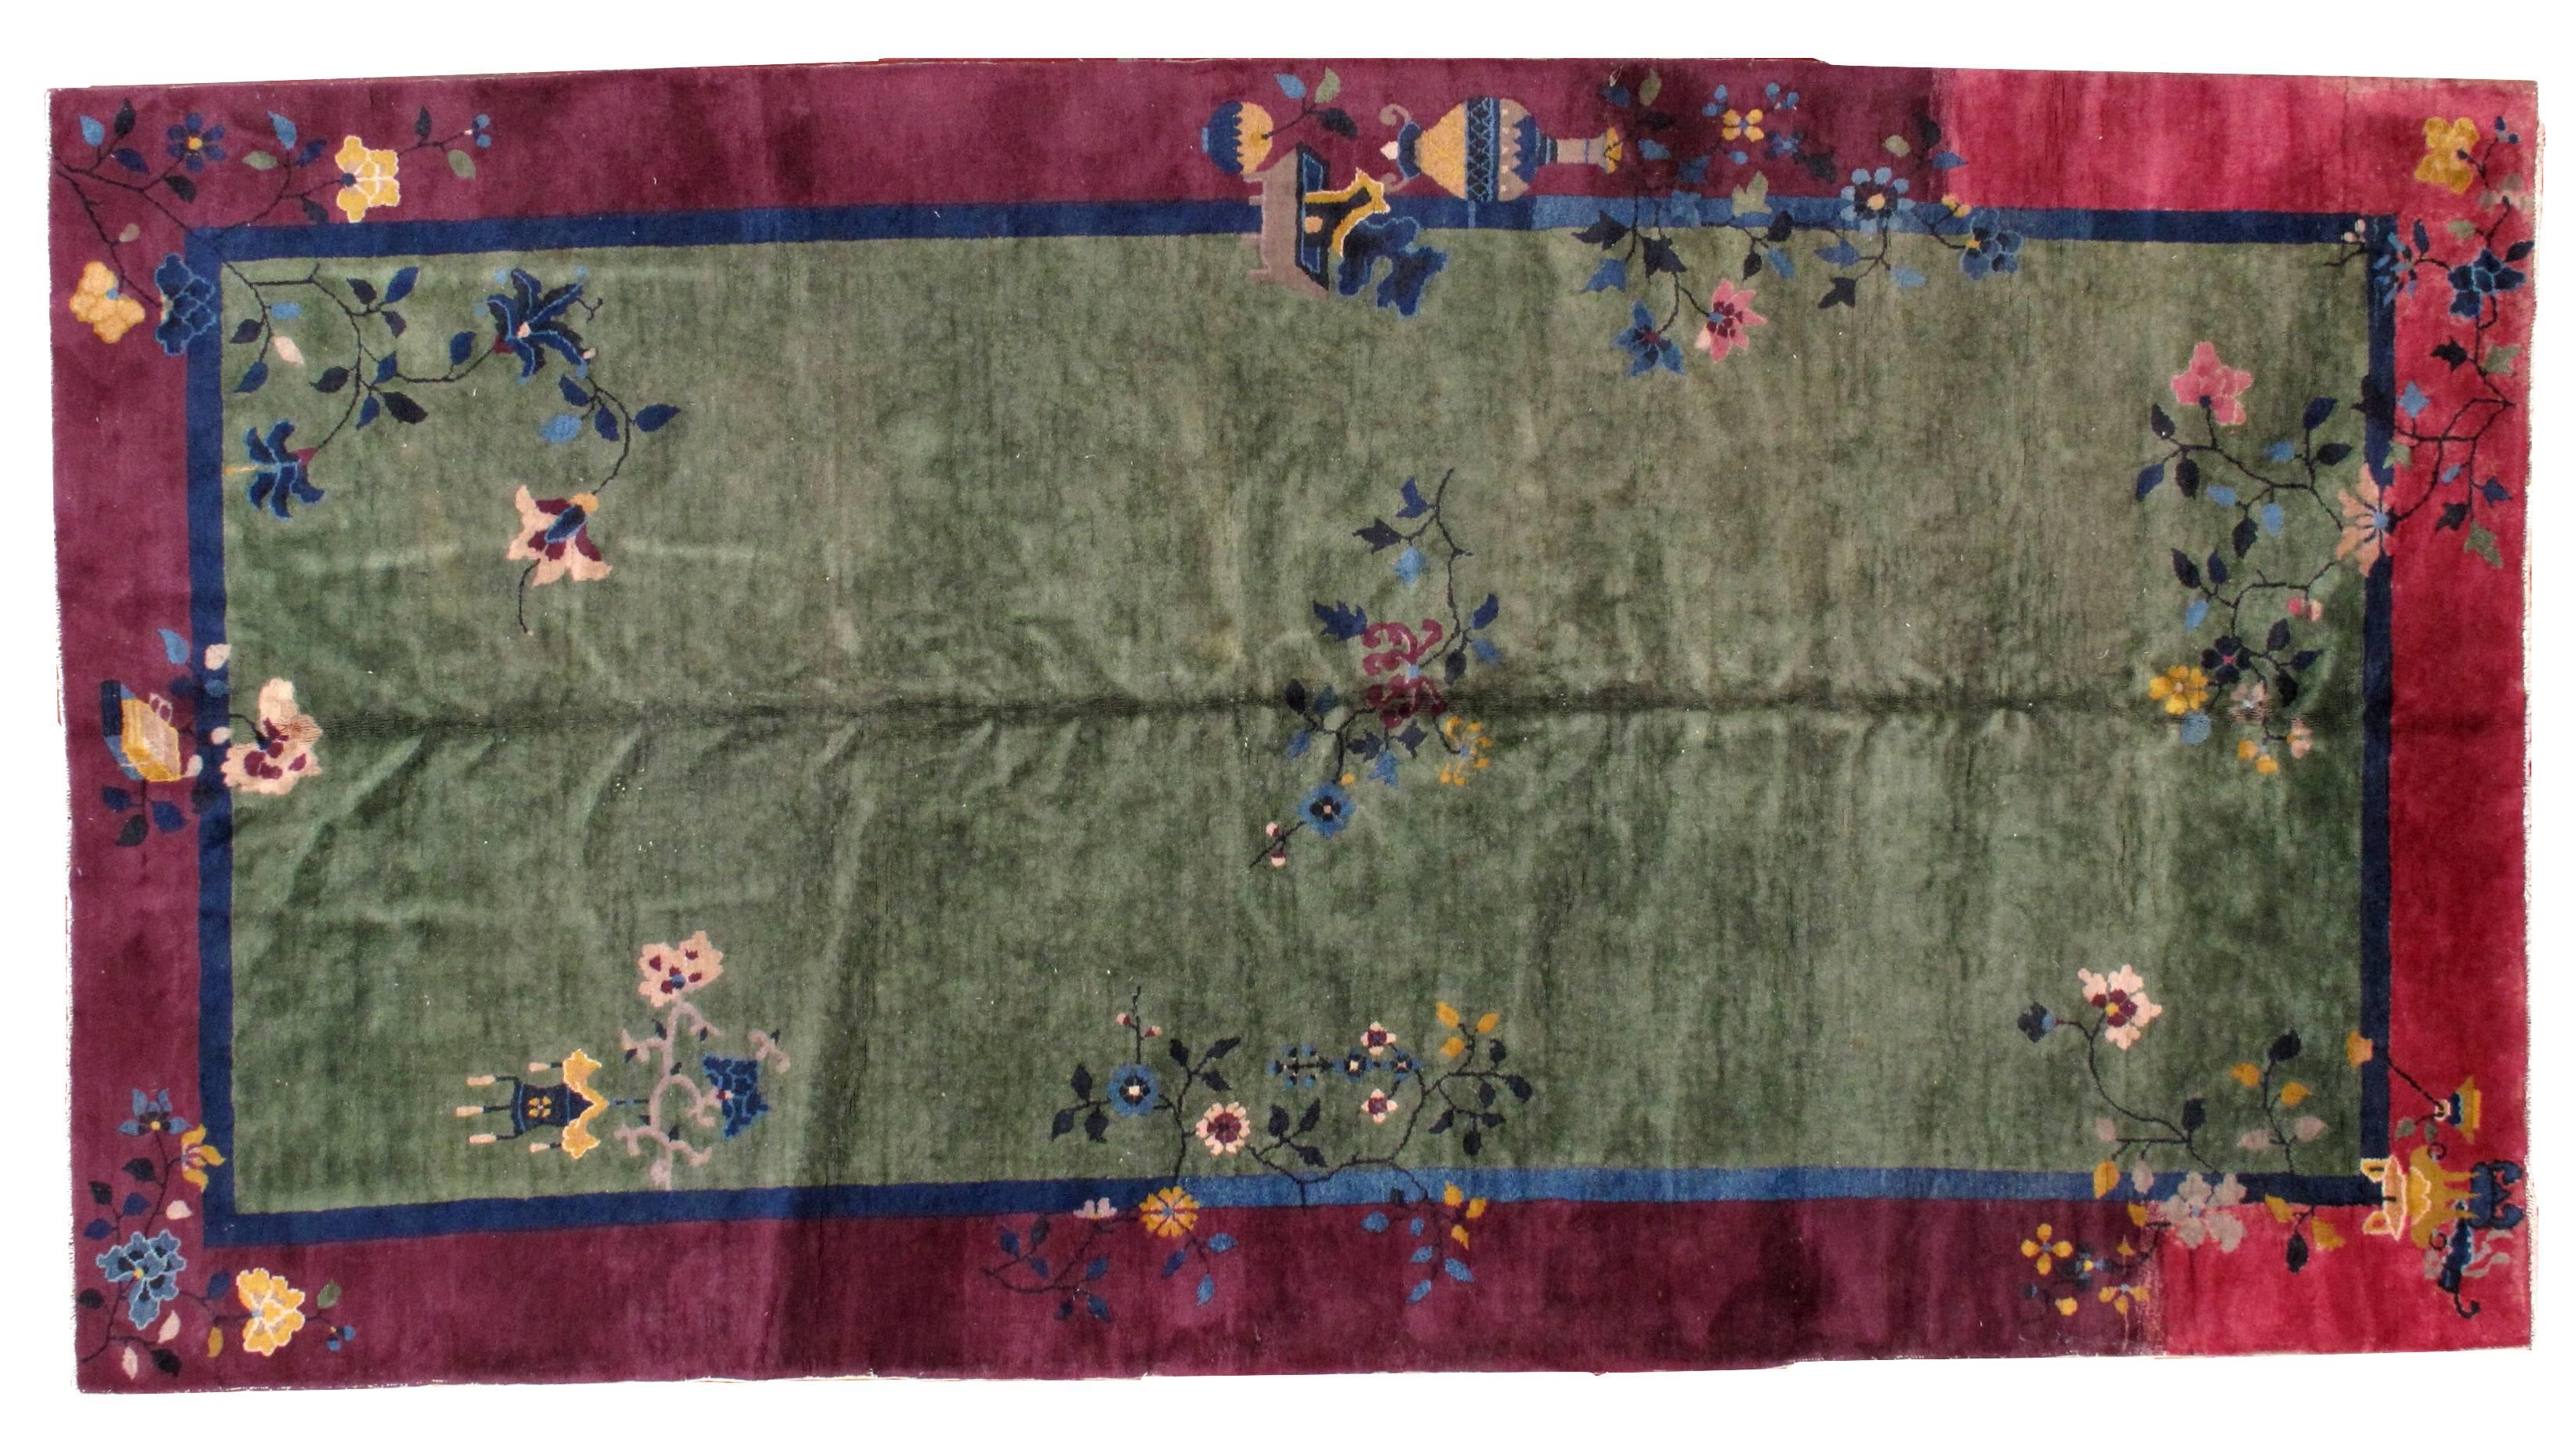 Antique Art Deco Chinese rug in original condition. The rug has green background color and border in burgundy border for the most of the part, on one side the border changes to a fuchsia shade. Very unusual size. The condition is original good, has